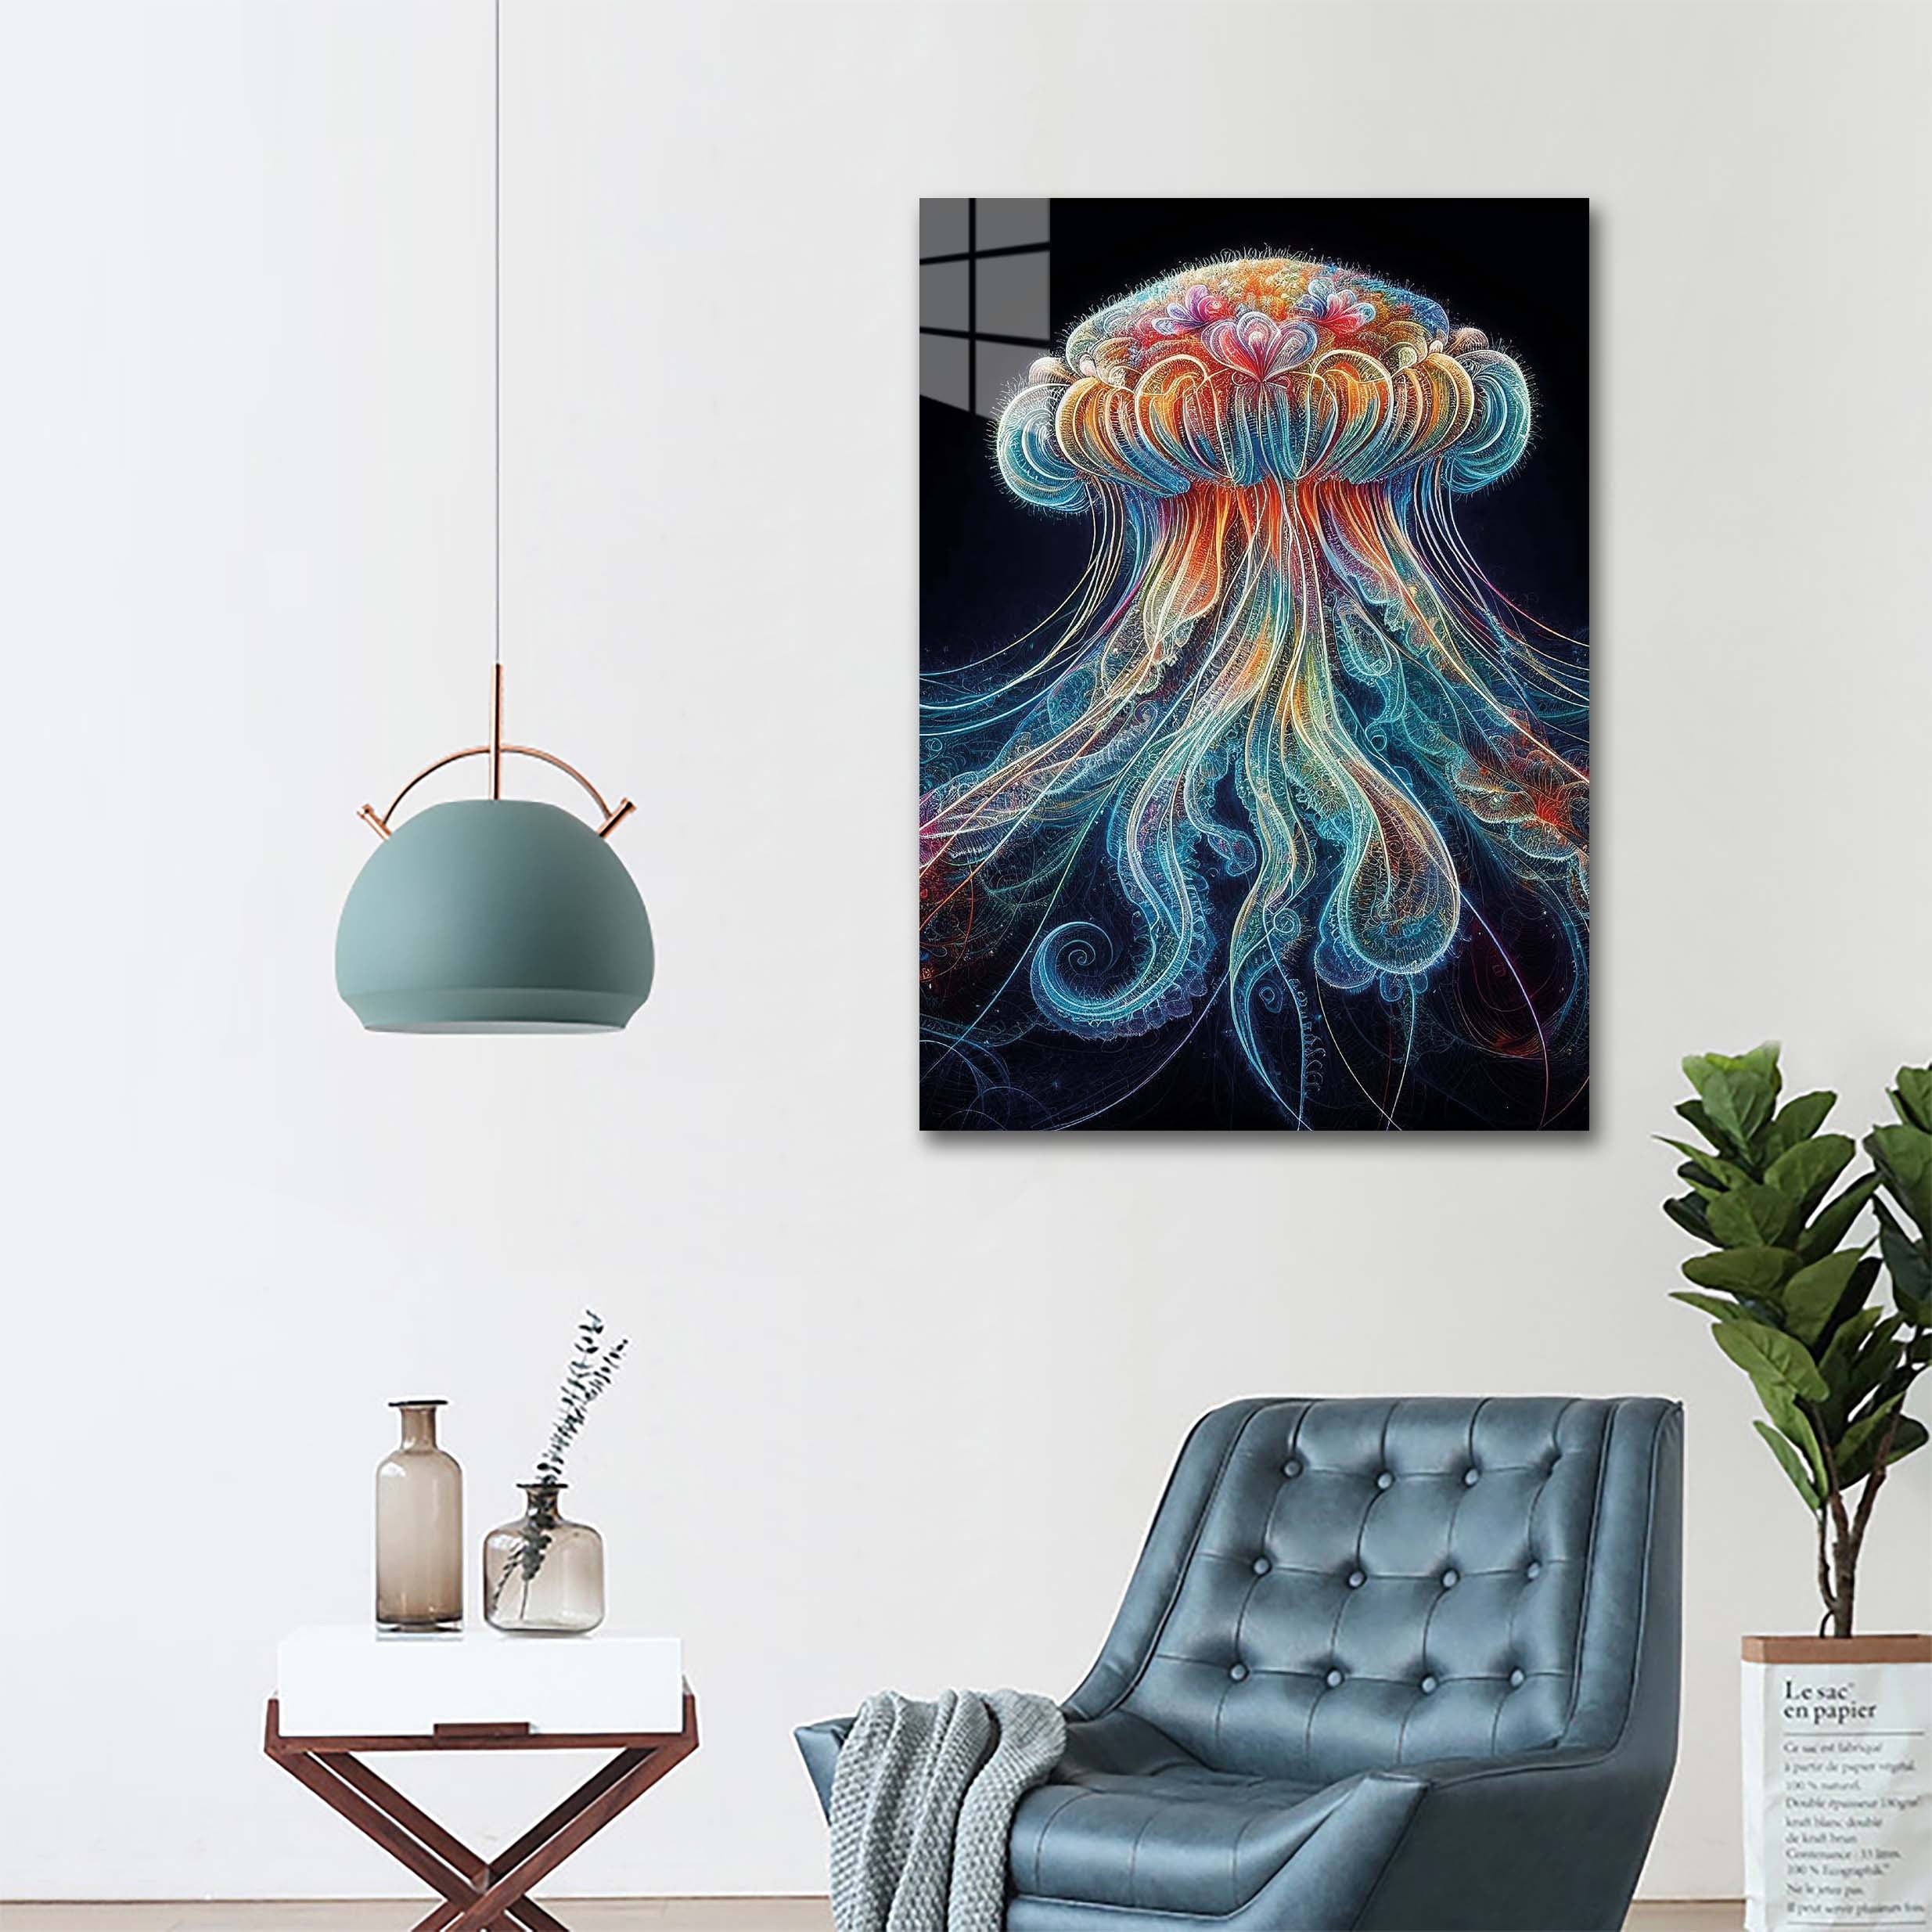 Nerve Jellyfish-designed by @Krizeggers